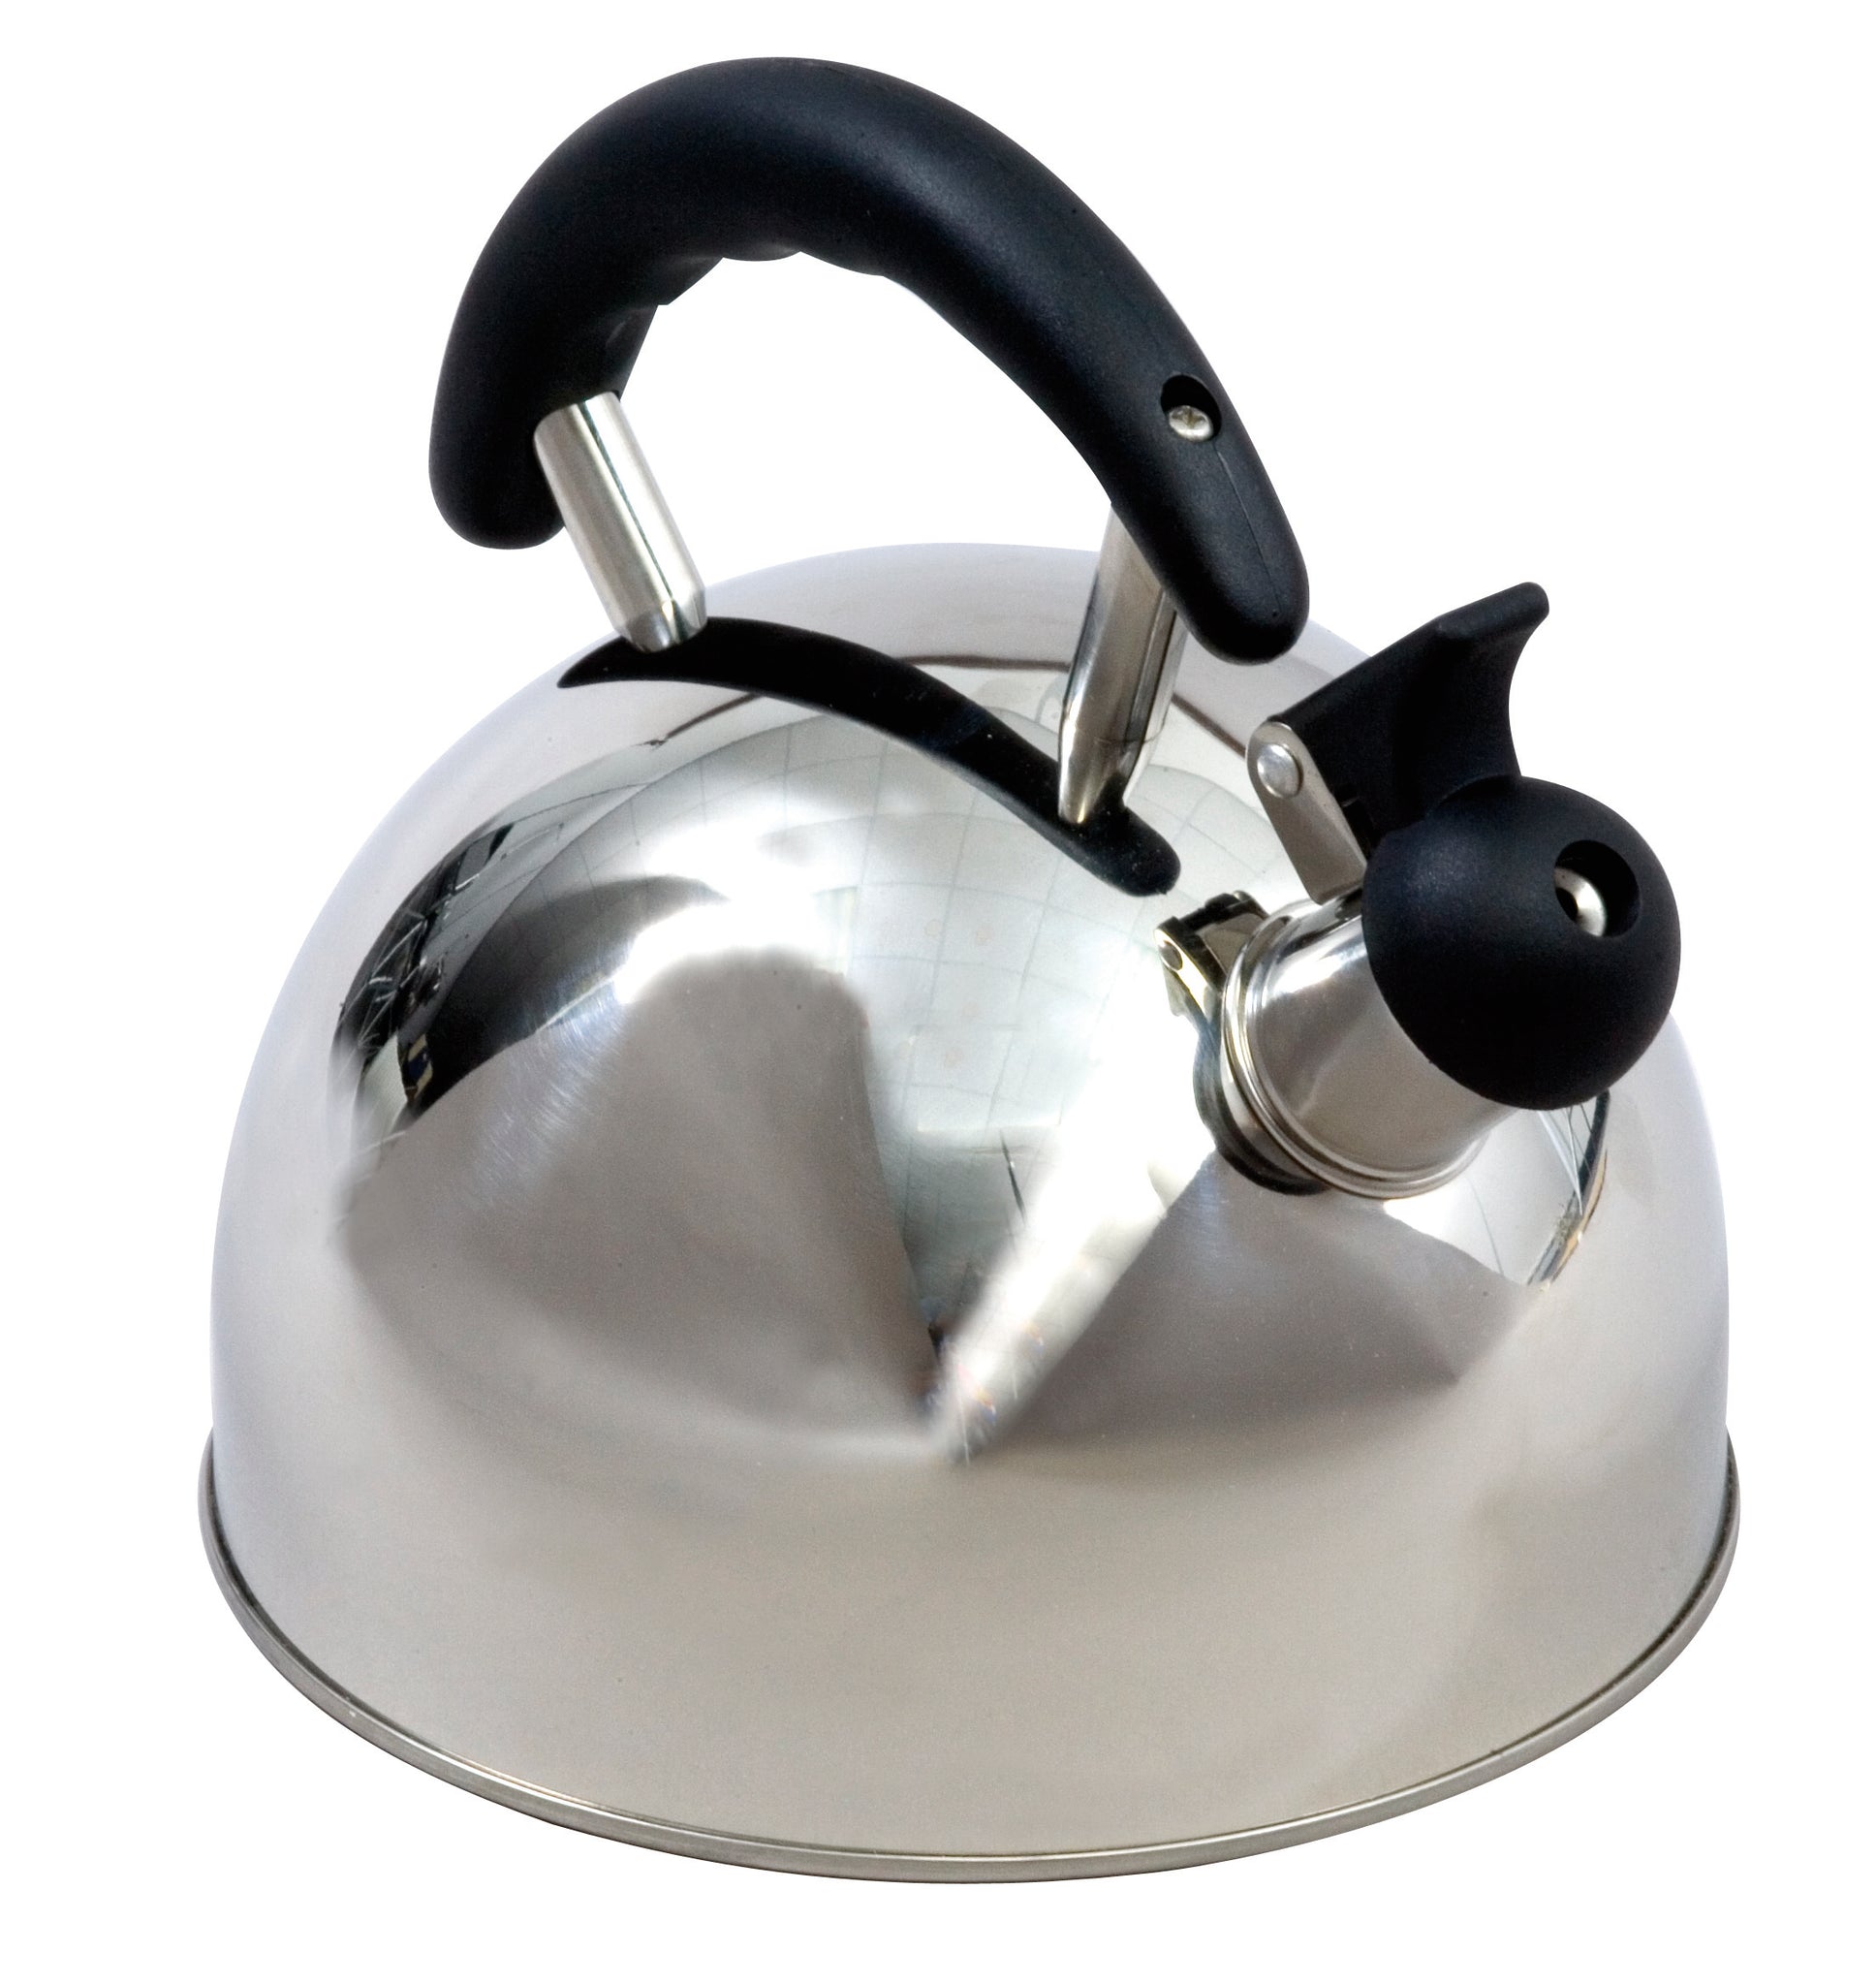 2L Rapport Stainless Steel Whistling Kettle